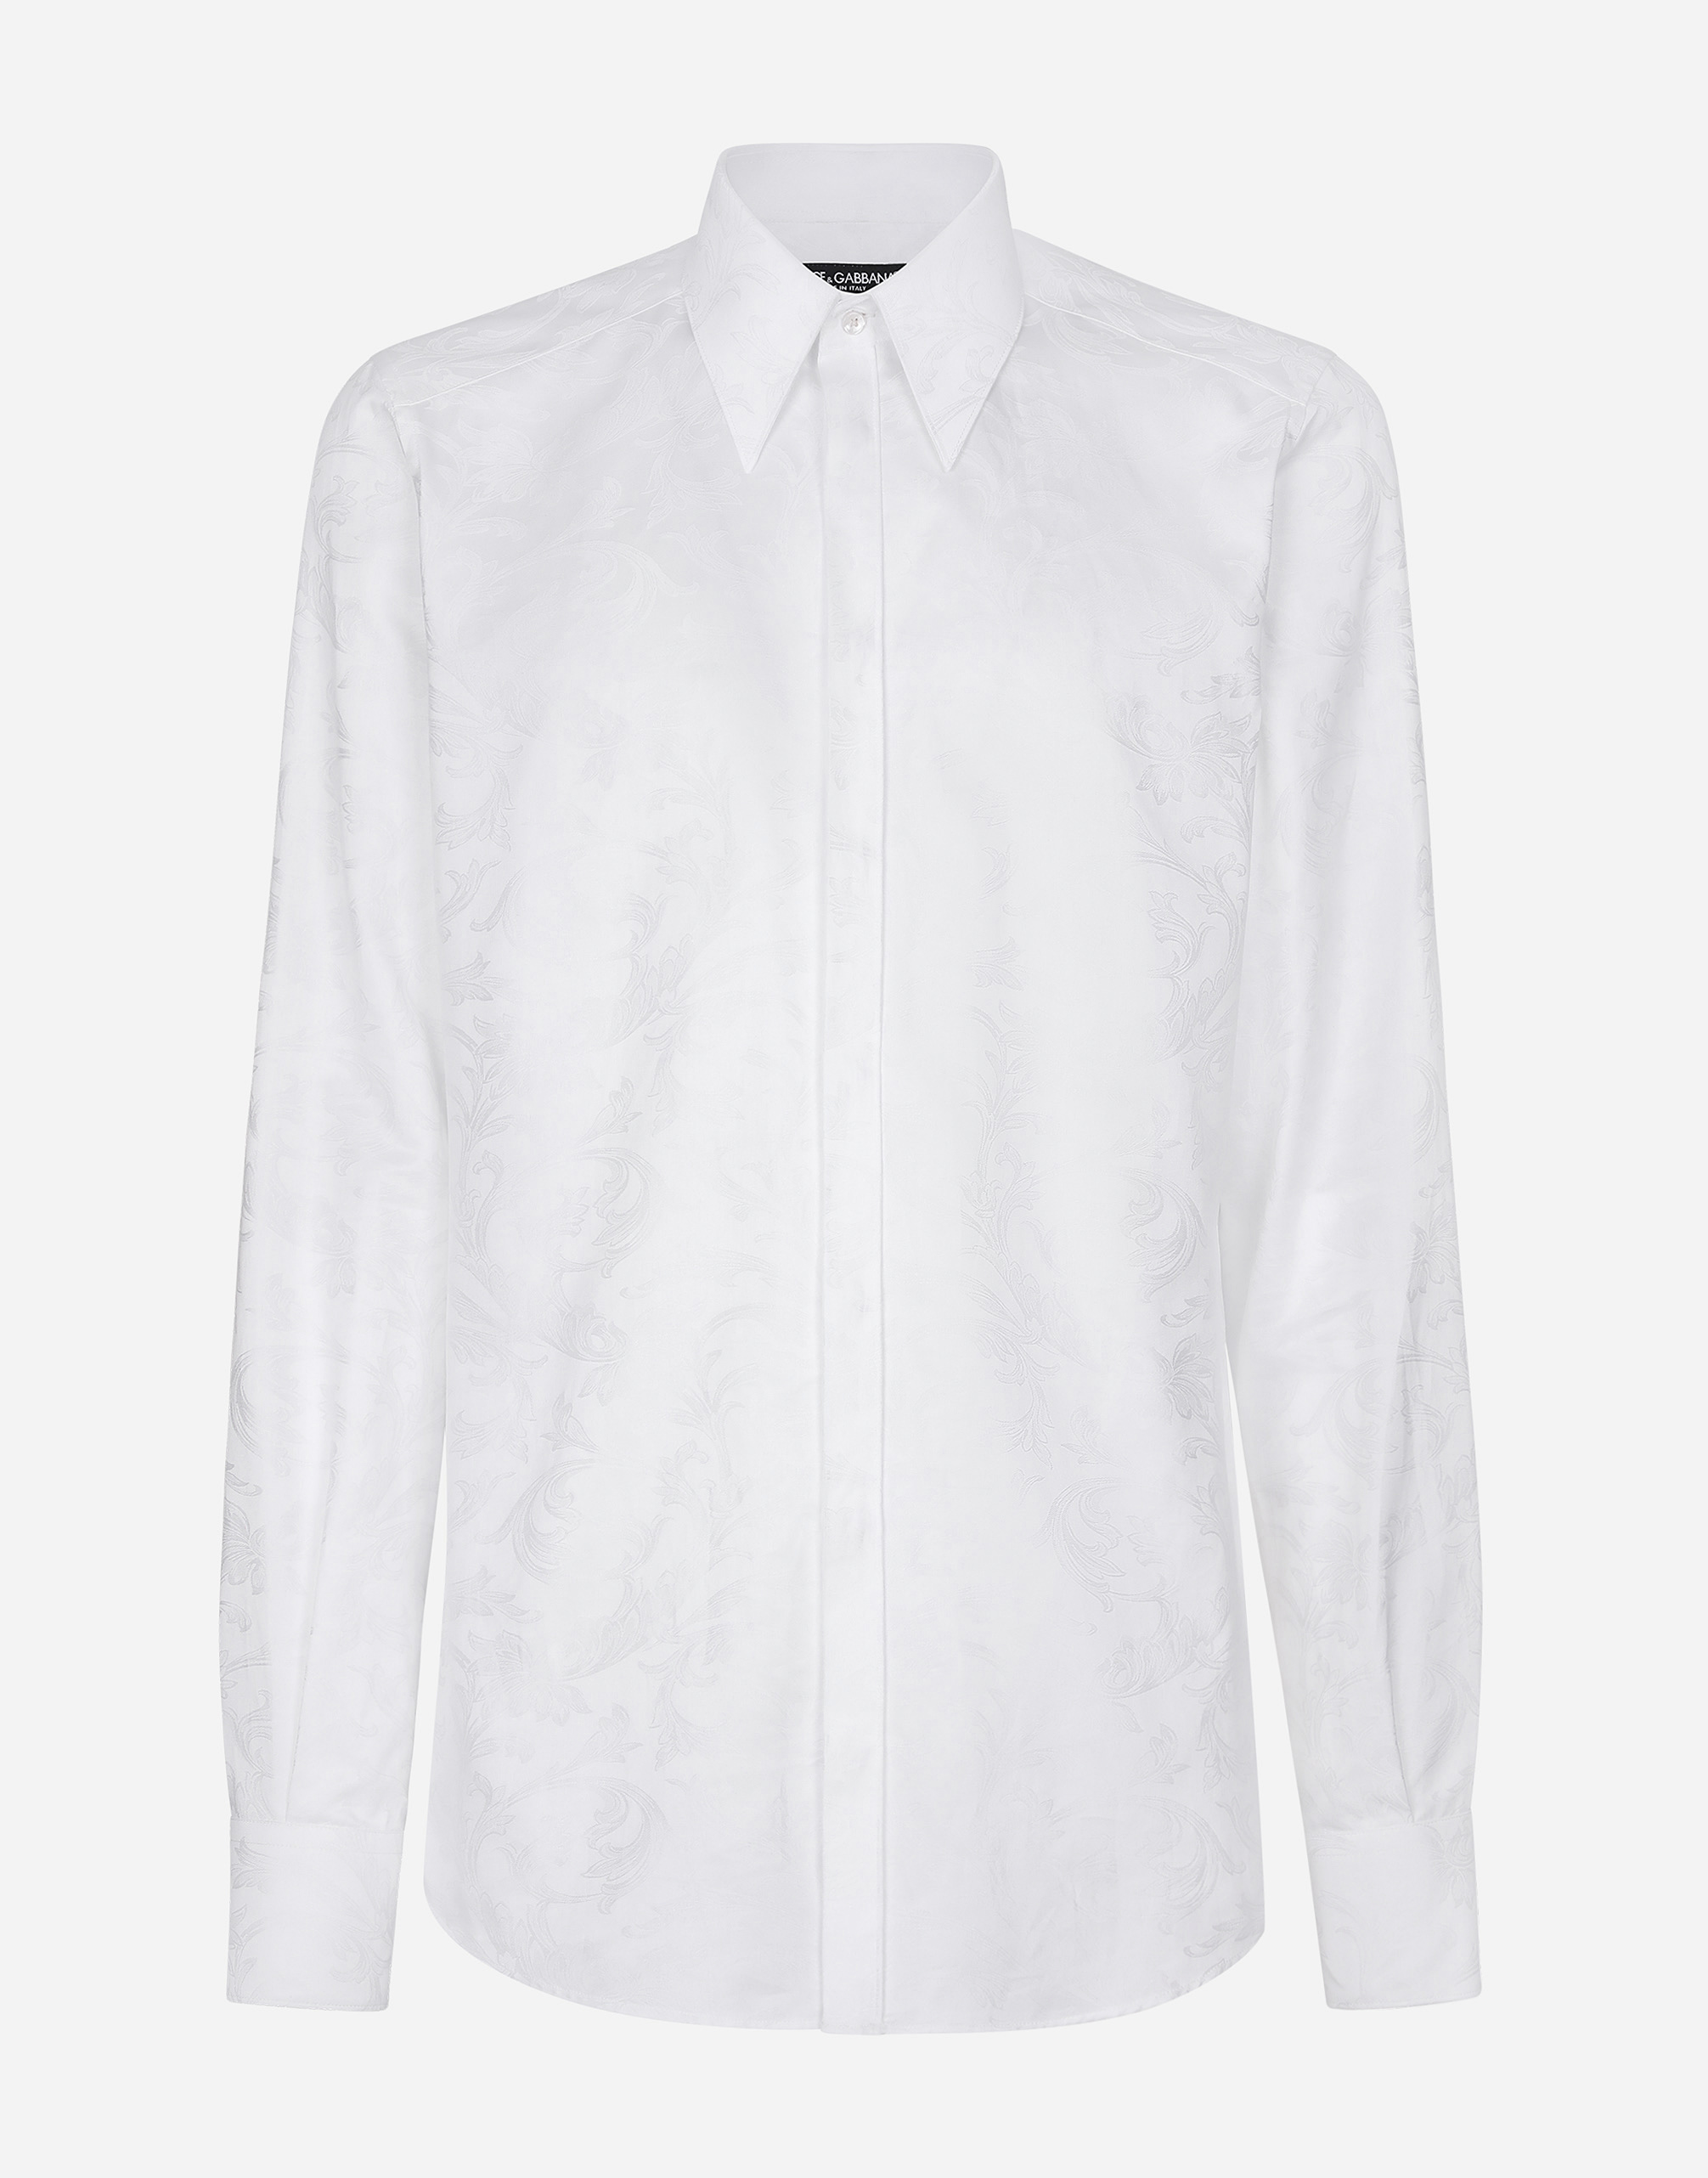 Dolce & Gabbana Floral Cotton Jacquard Martini-fit Shirt In White